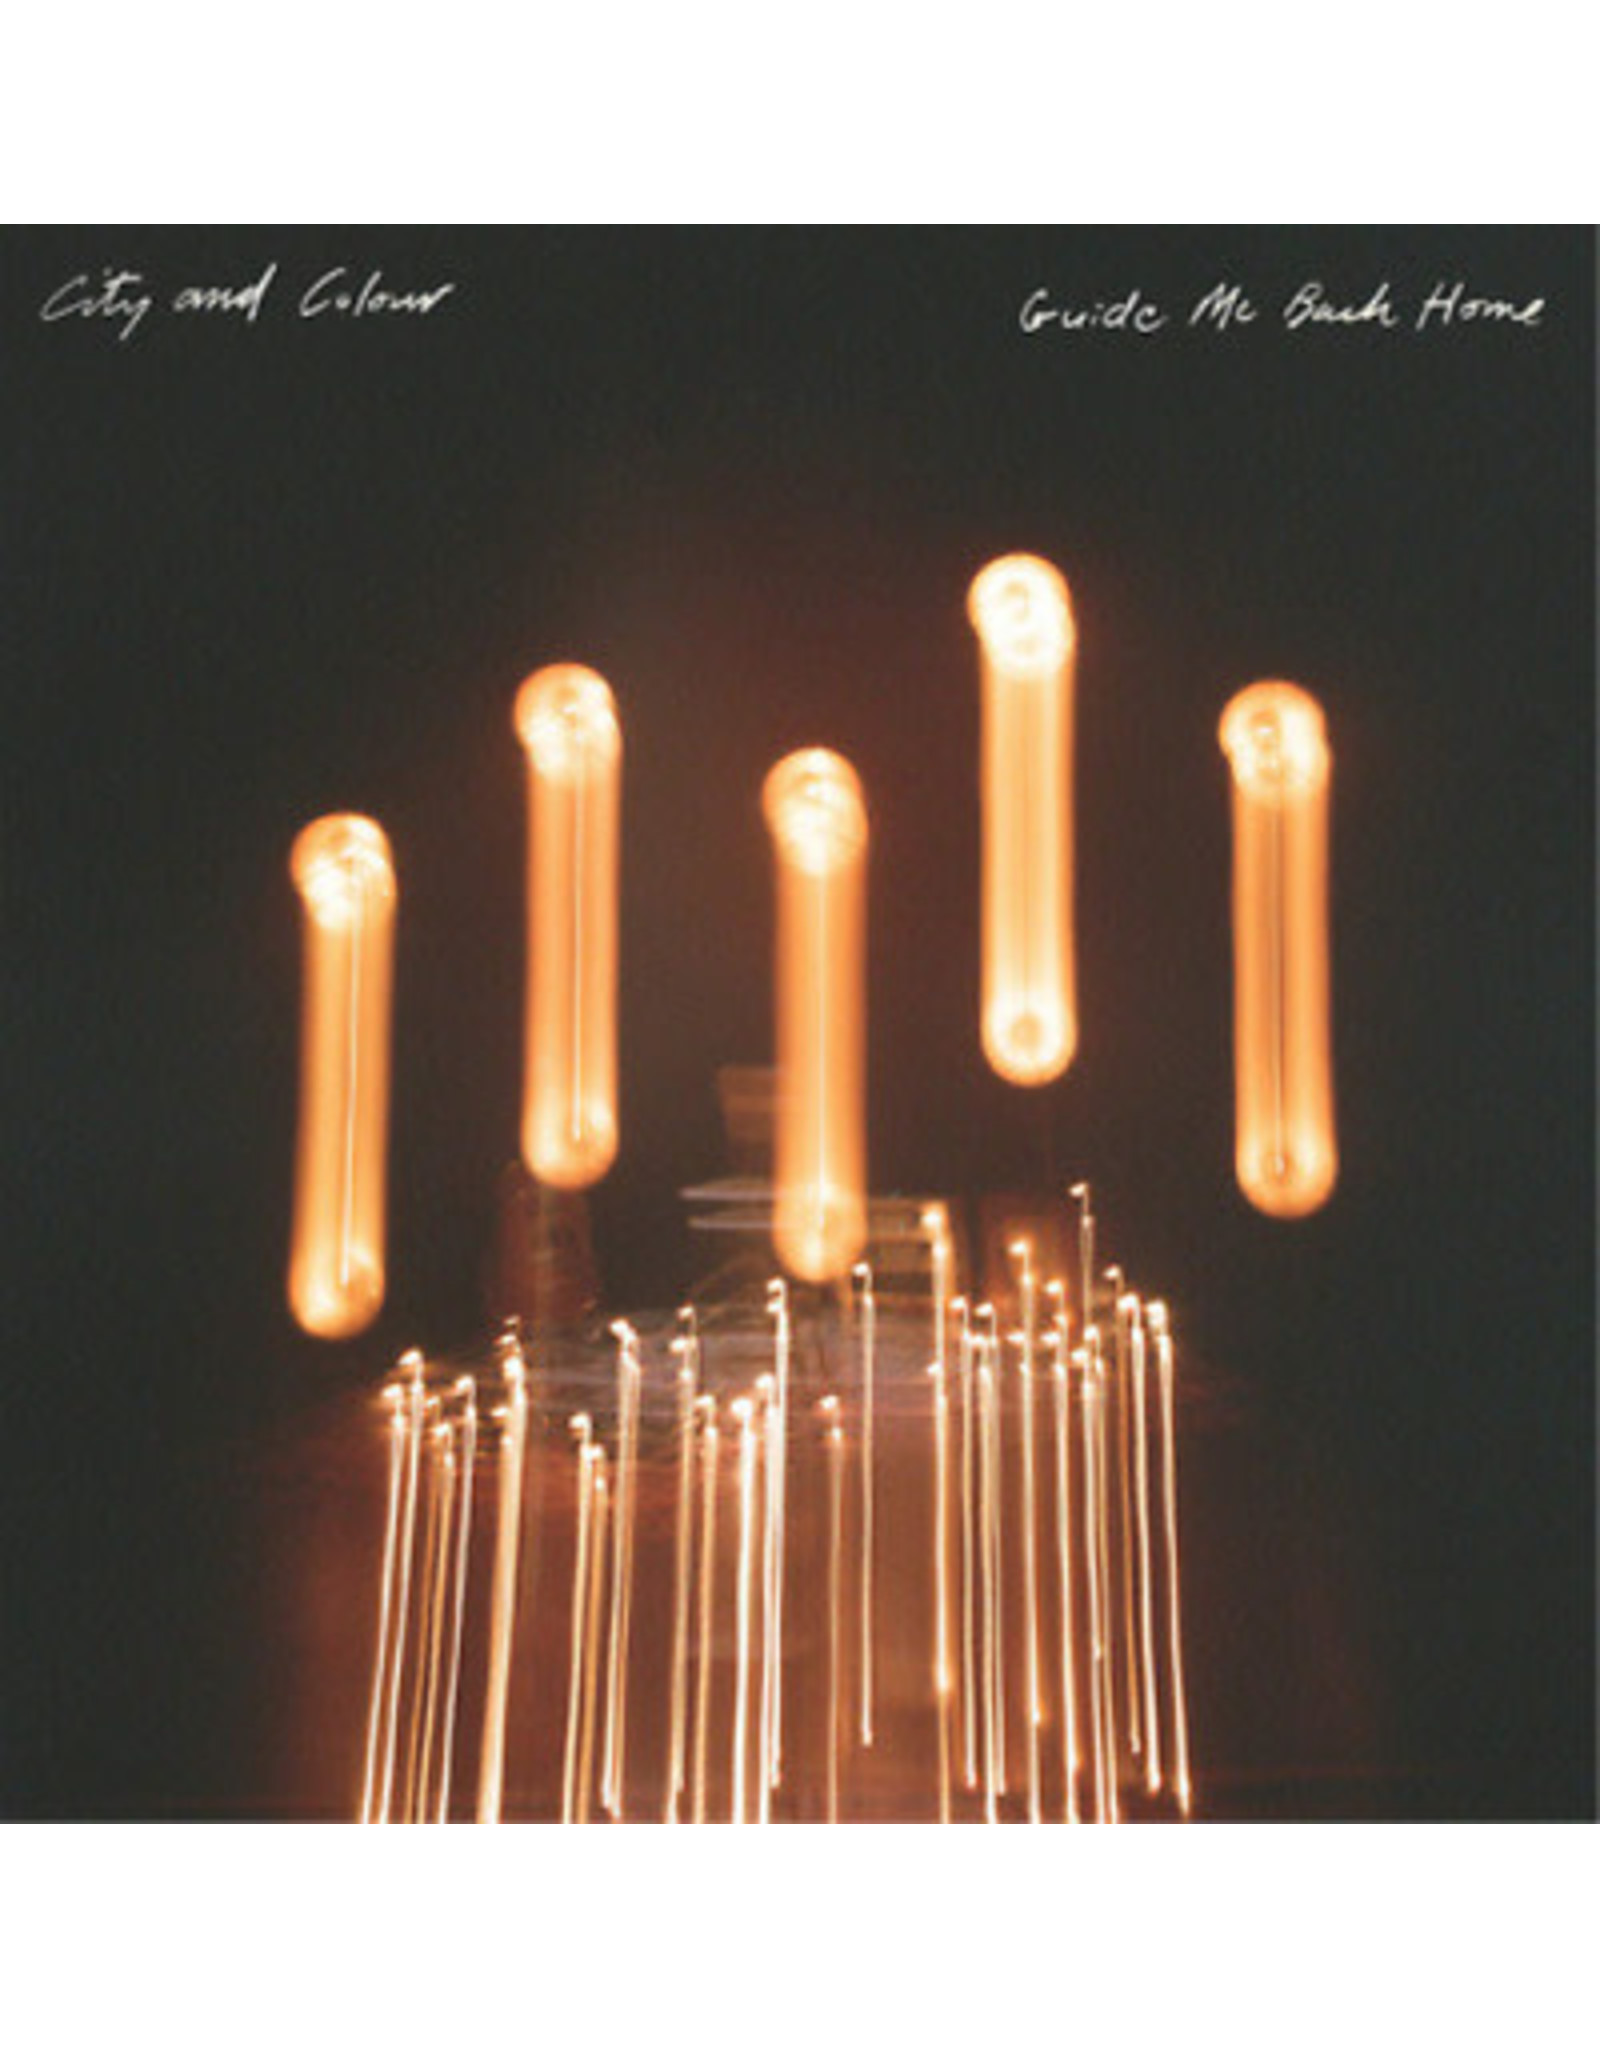 City And Colour - Guide Me Back Home CD